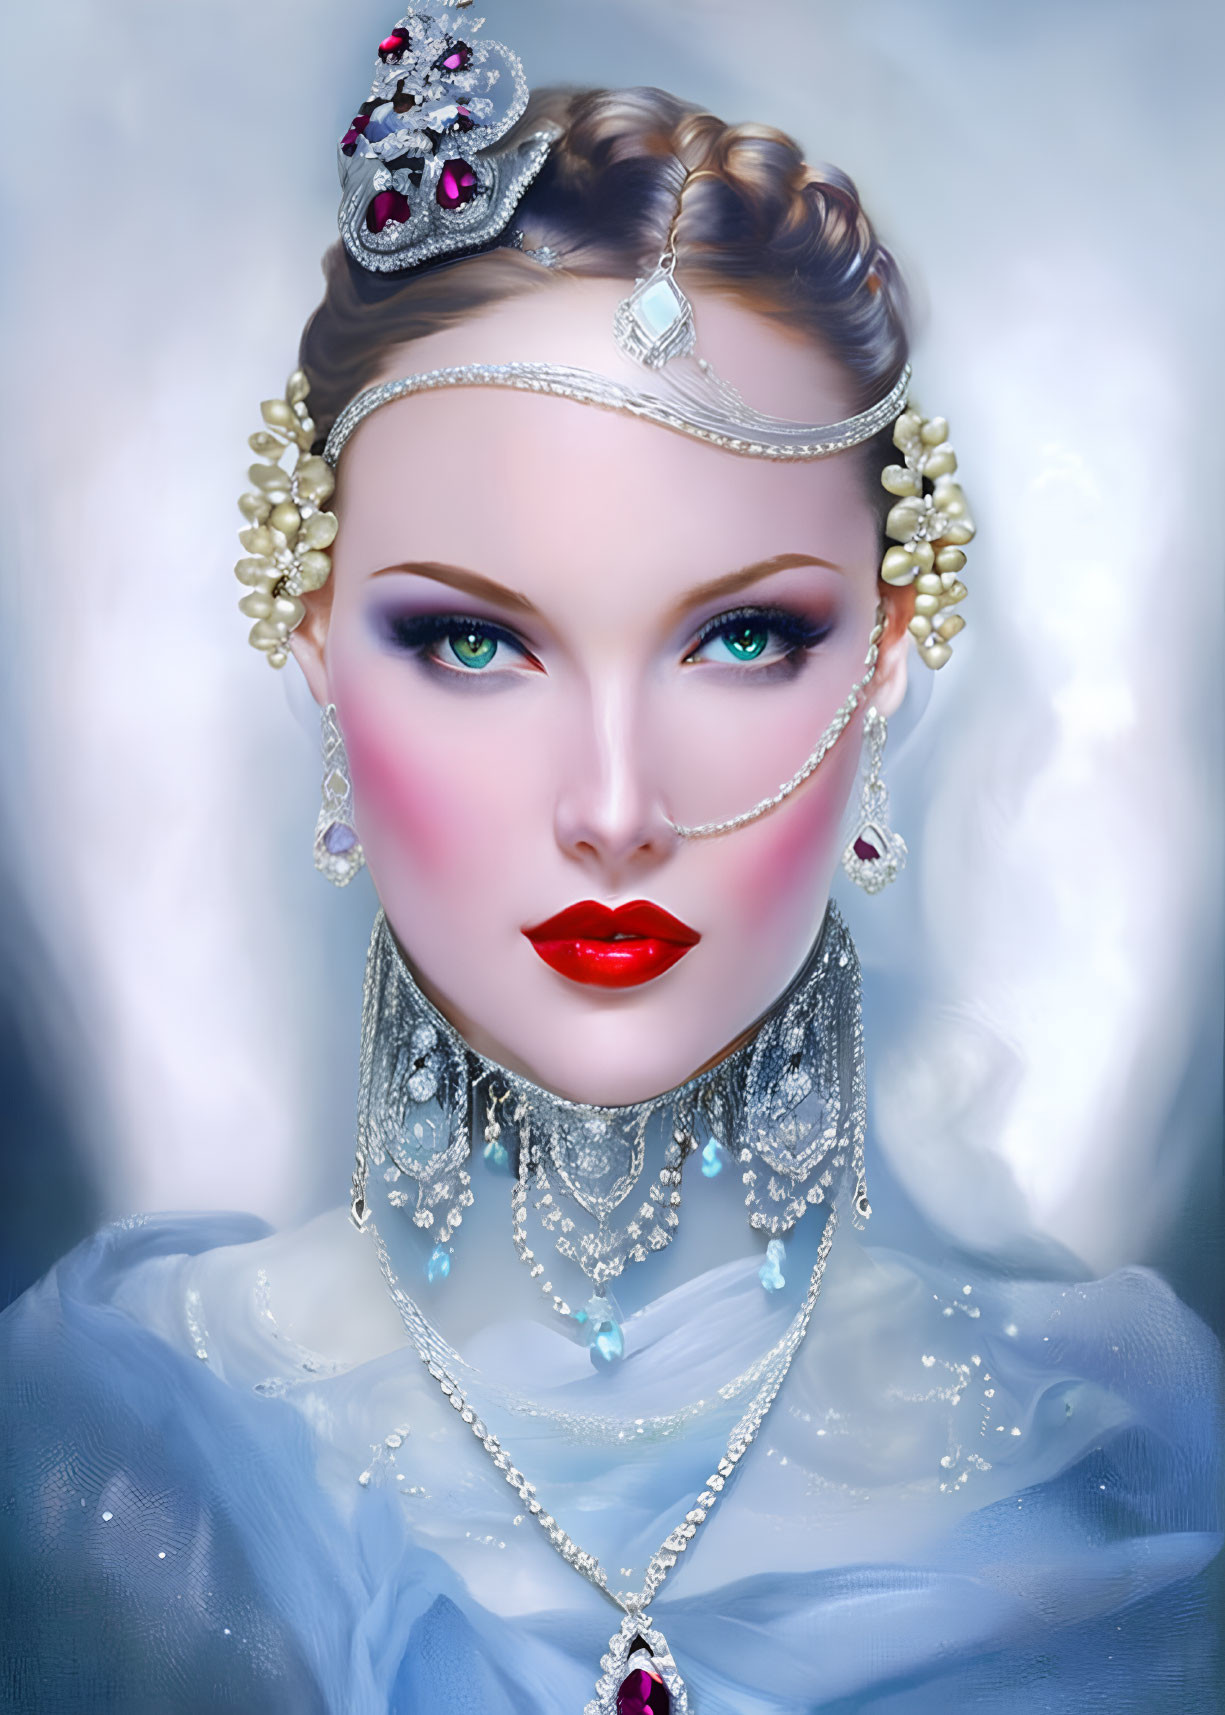 Detailed digital portrait of a woman with pearl headdress and jewelry